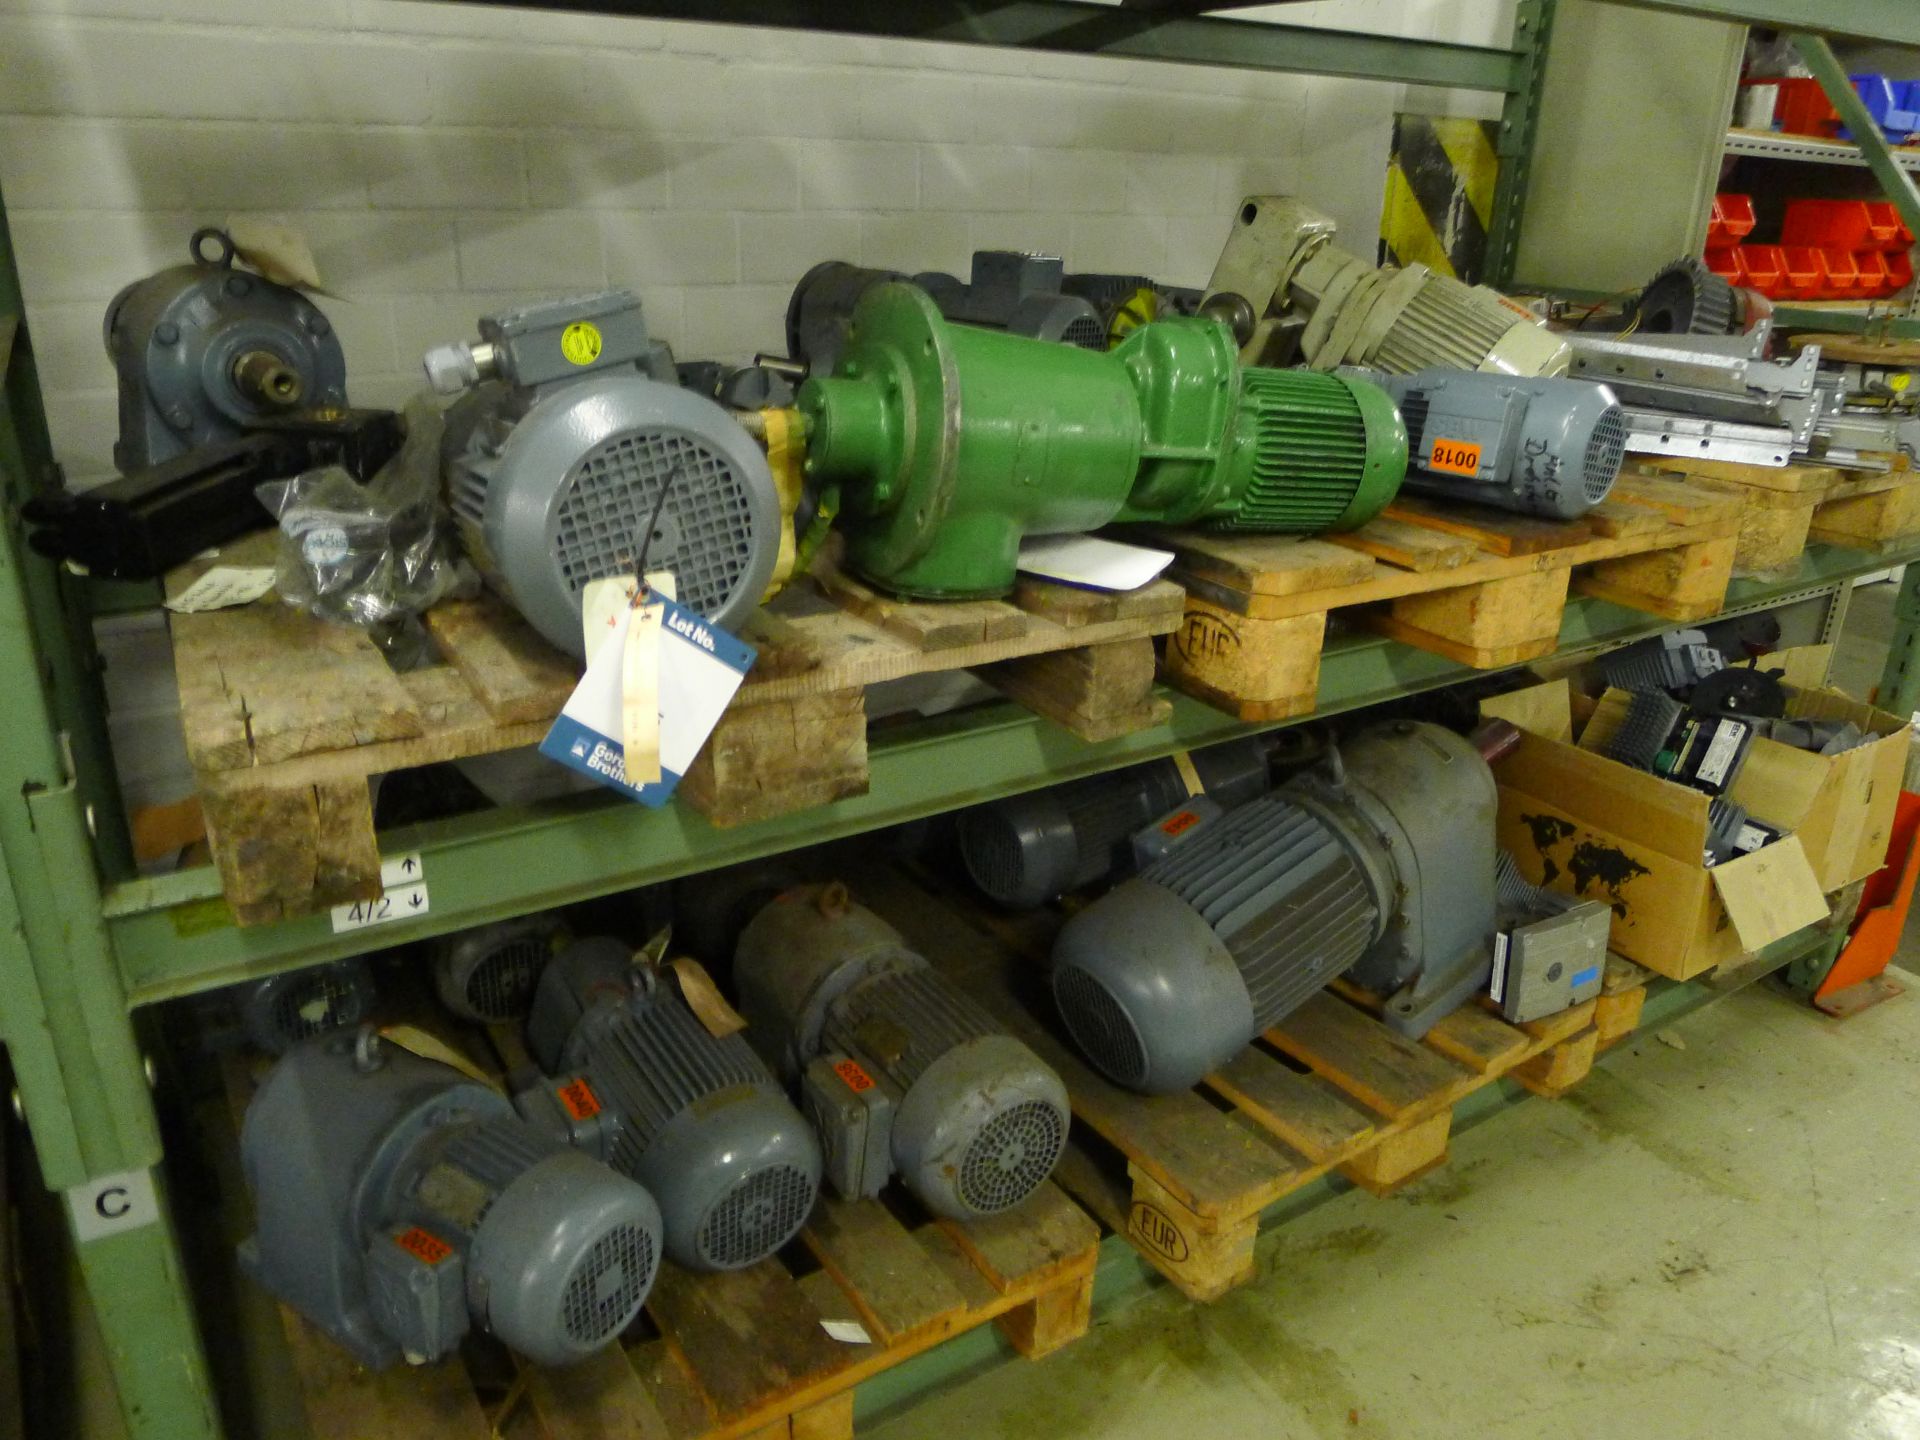 Contents to Racking Bay 4 to Include 31 SEW, ZAE Assorted Pumps, Motors and Drives (Dismantling - Image 2 of 3